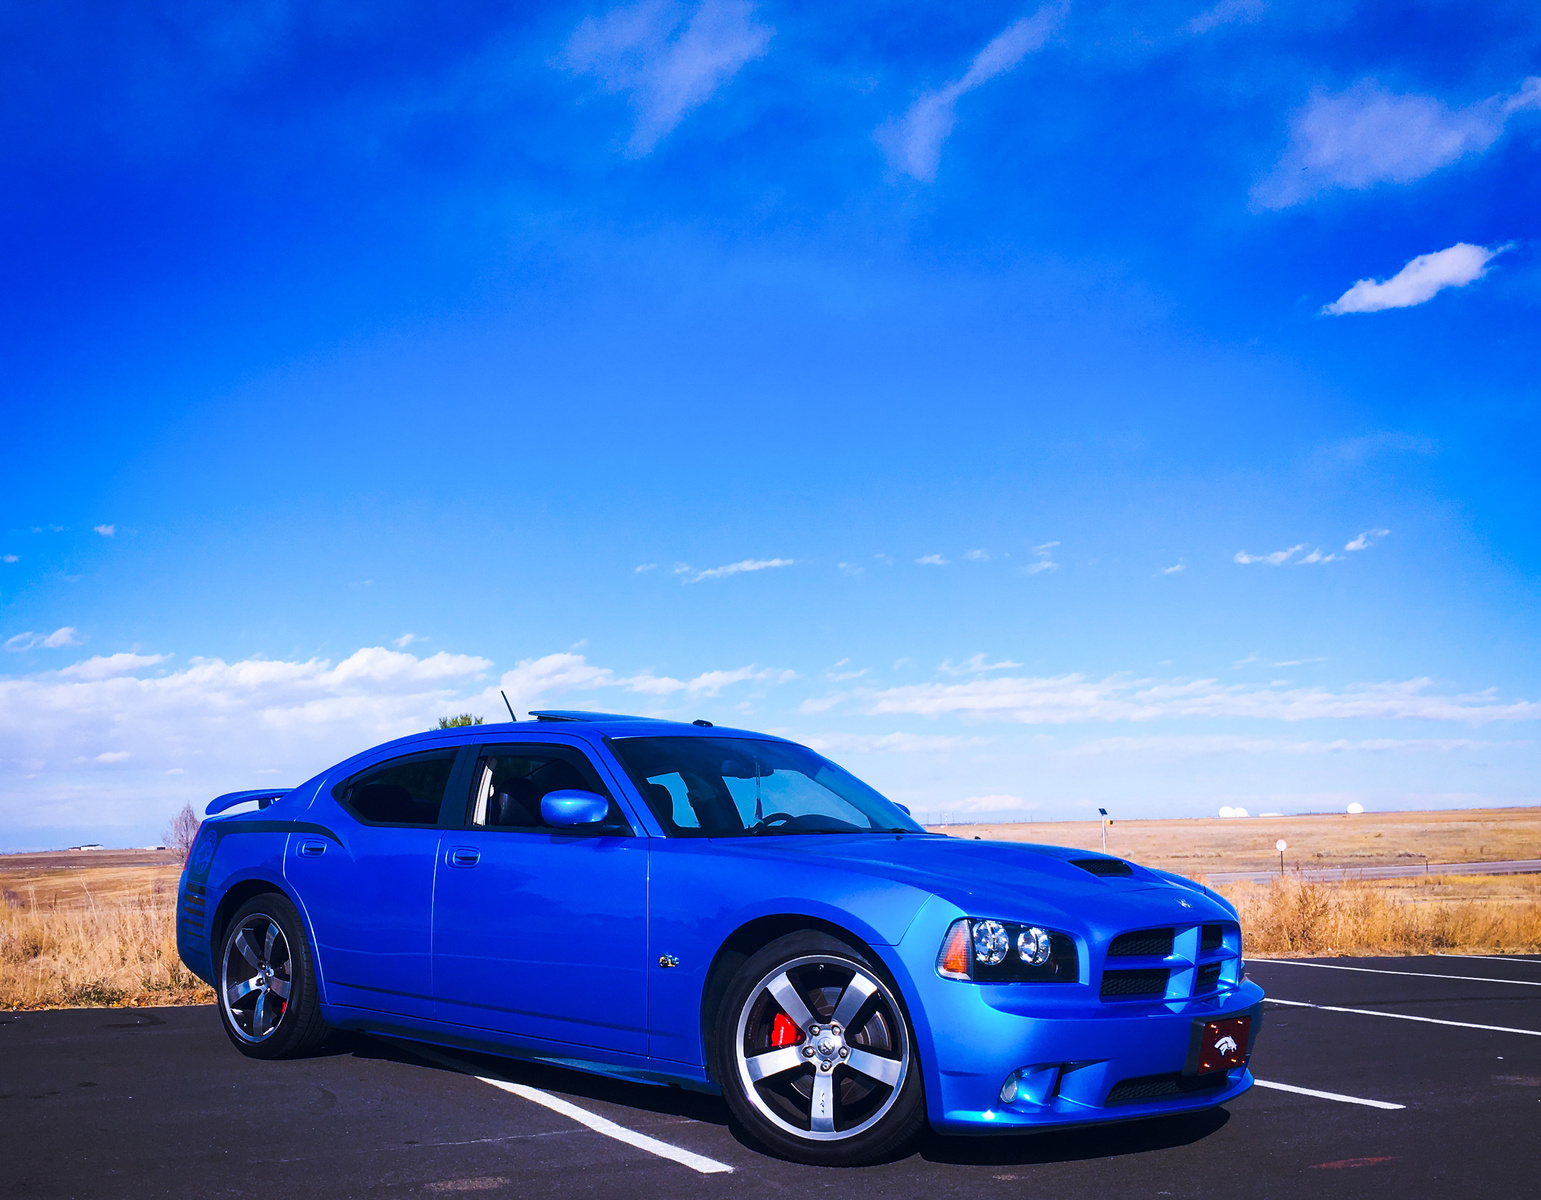 2008 Dodge Charger: Prices, Reviews & Pictures - CarGurus